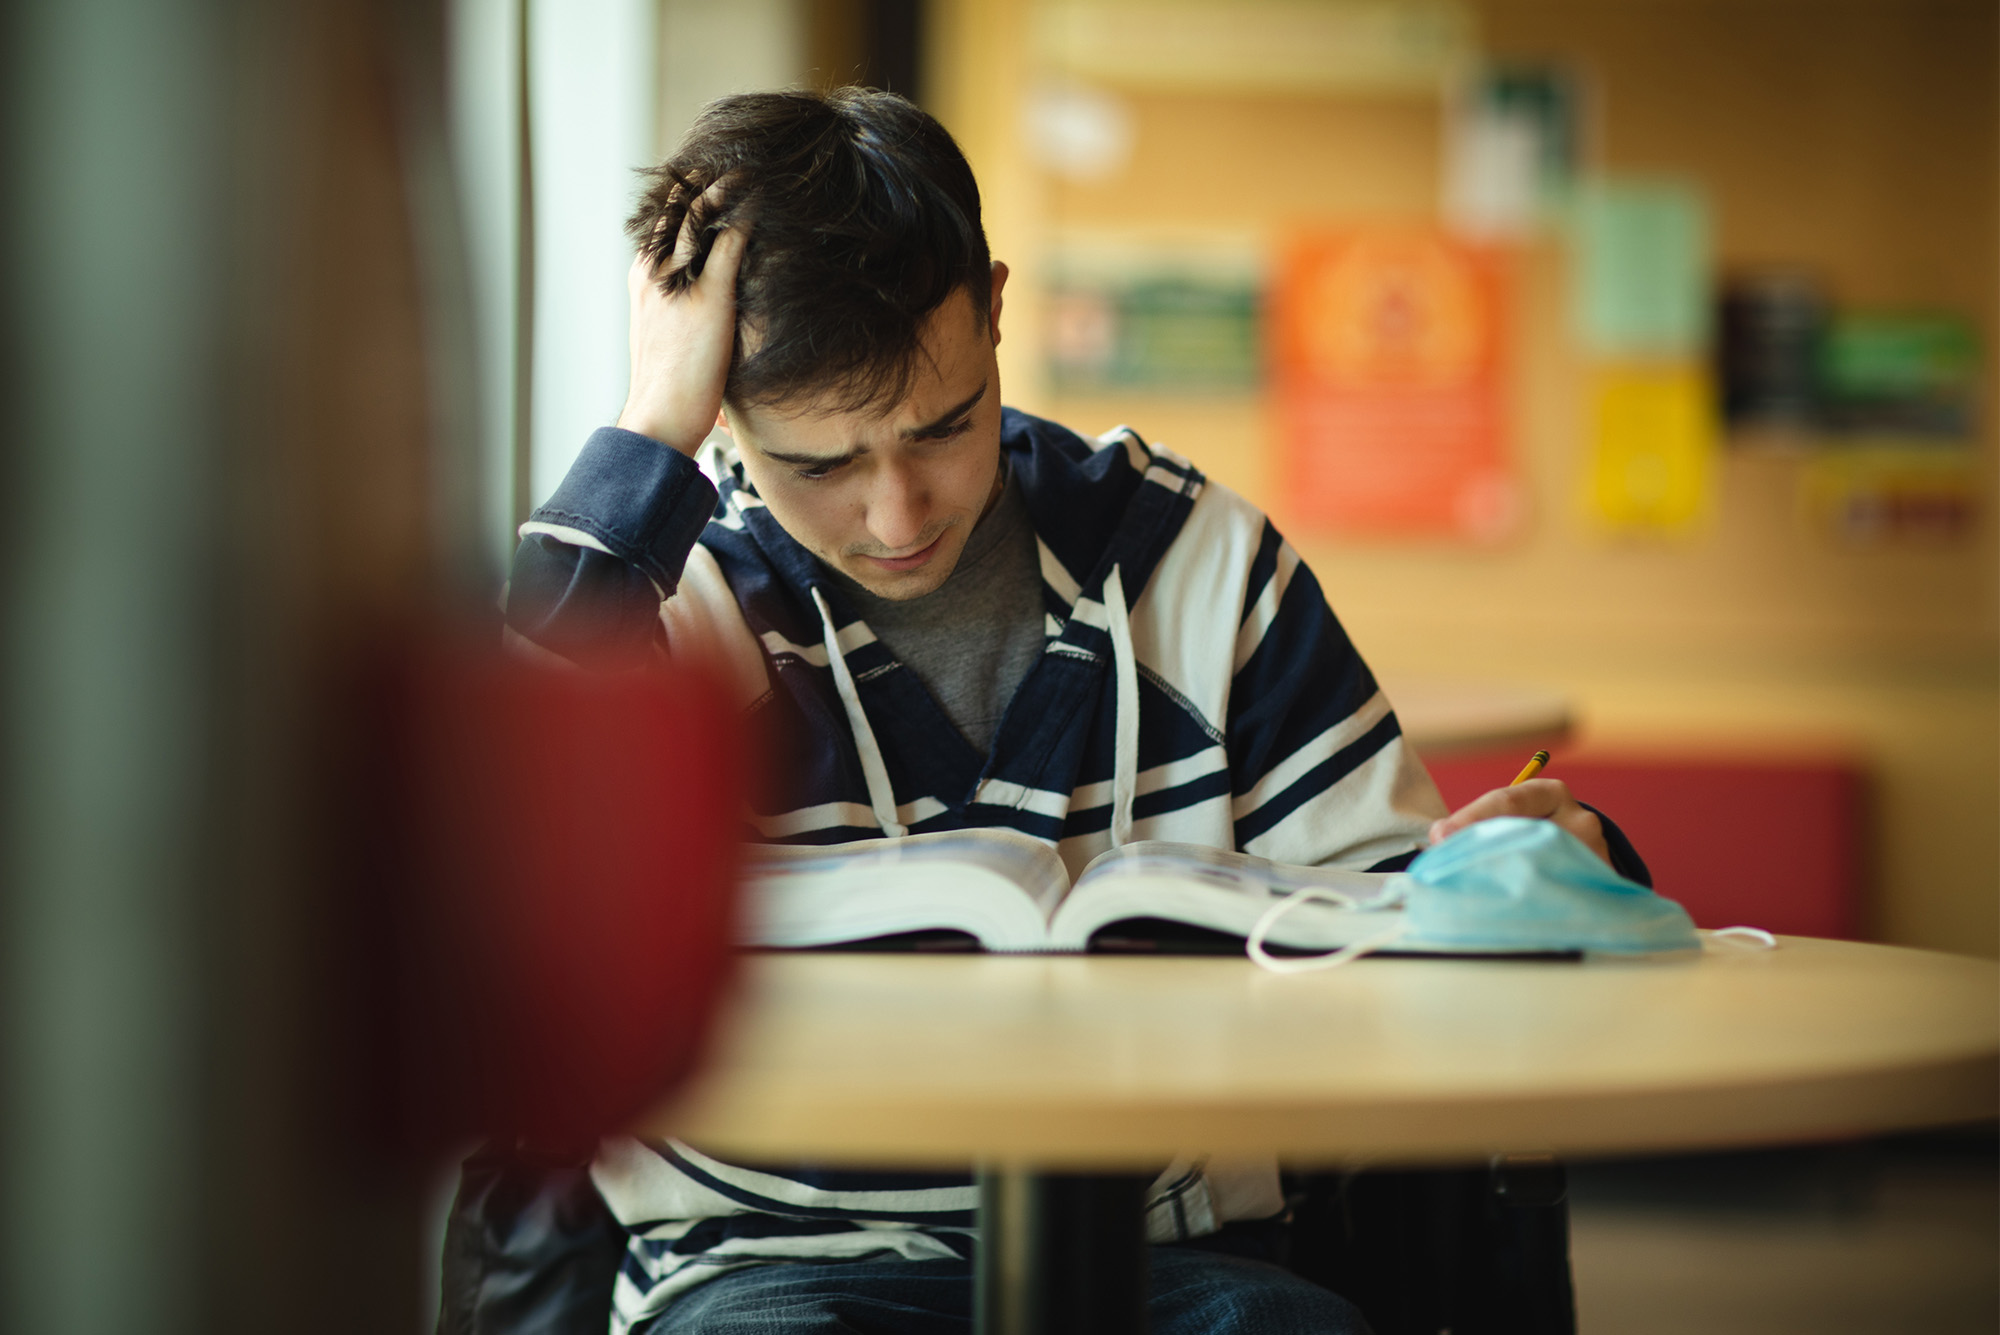 Mental Health of College Students Is Getting Worse The Brink Boston University picture